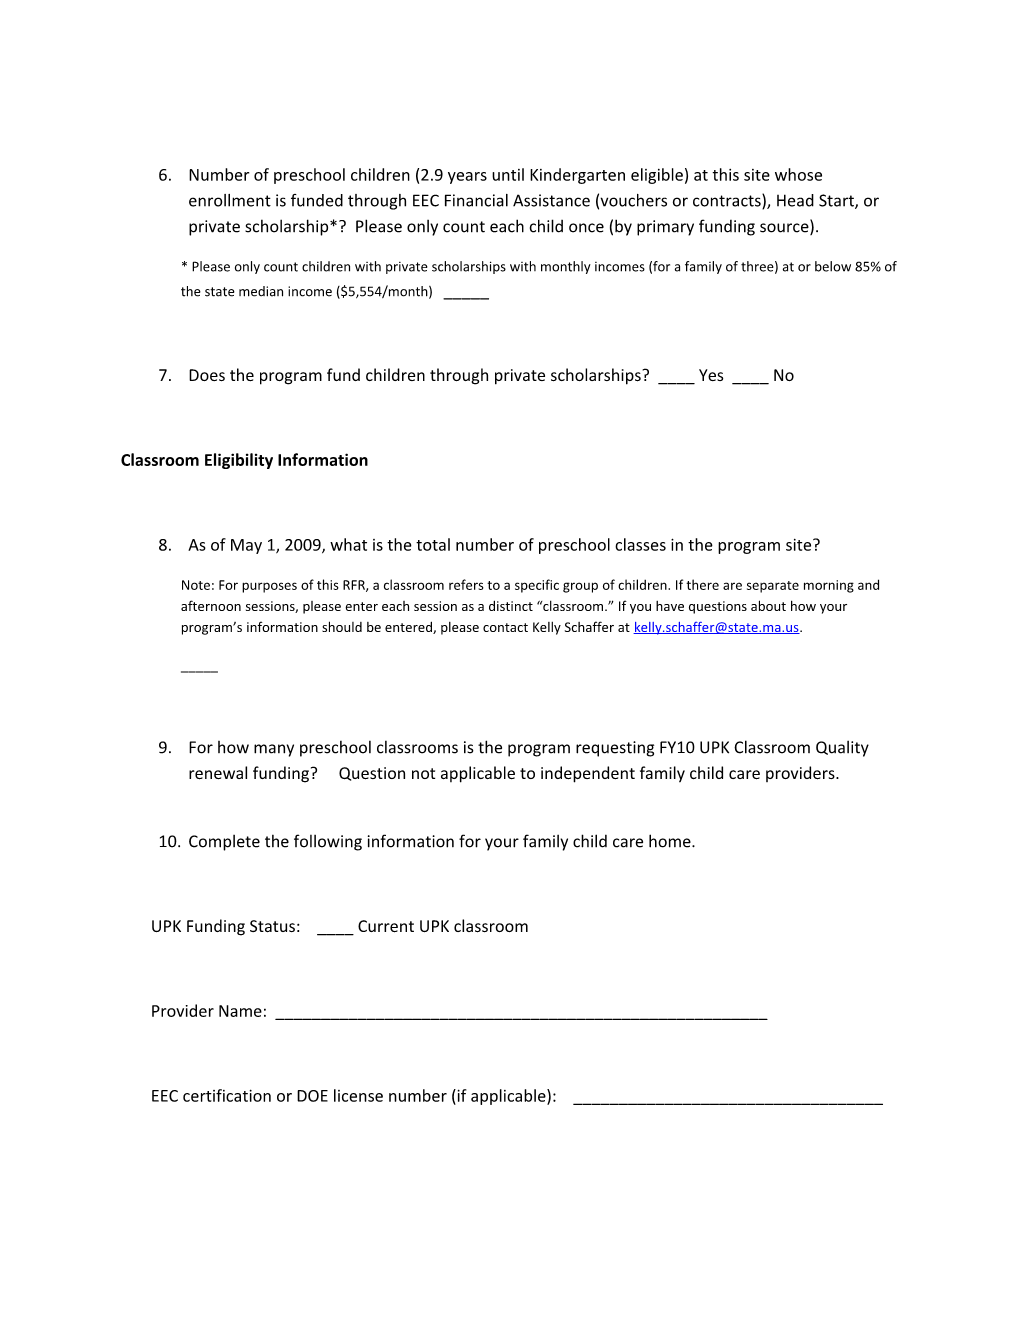 FY10 Universal Pre-Kindergarten (UPK) Classroom Quality Grant Renewal Questionnaire For